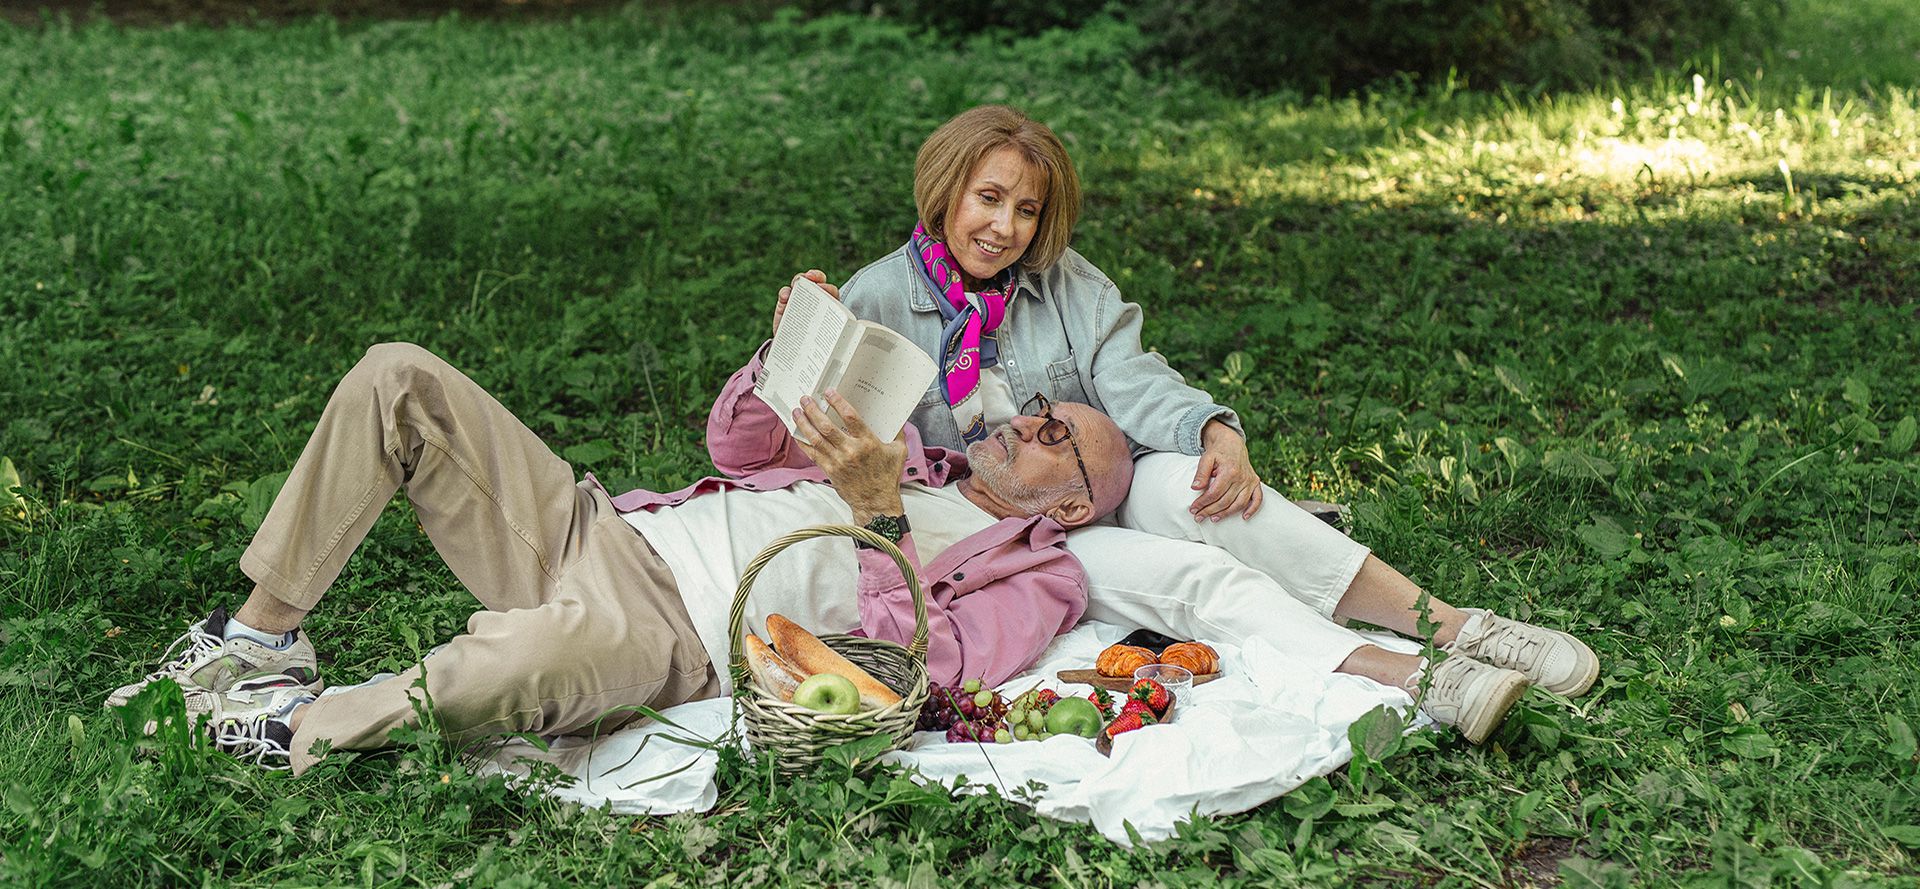 The Best Dating Sites For 50 And Older